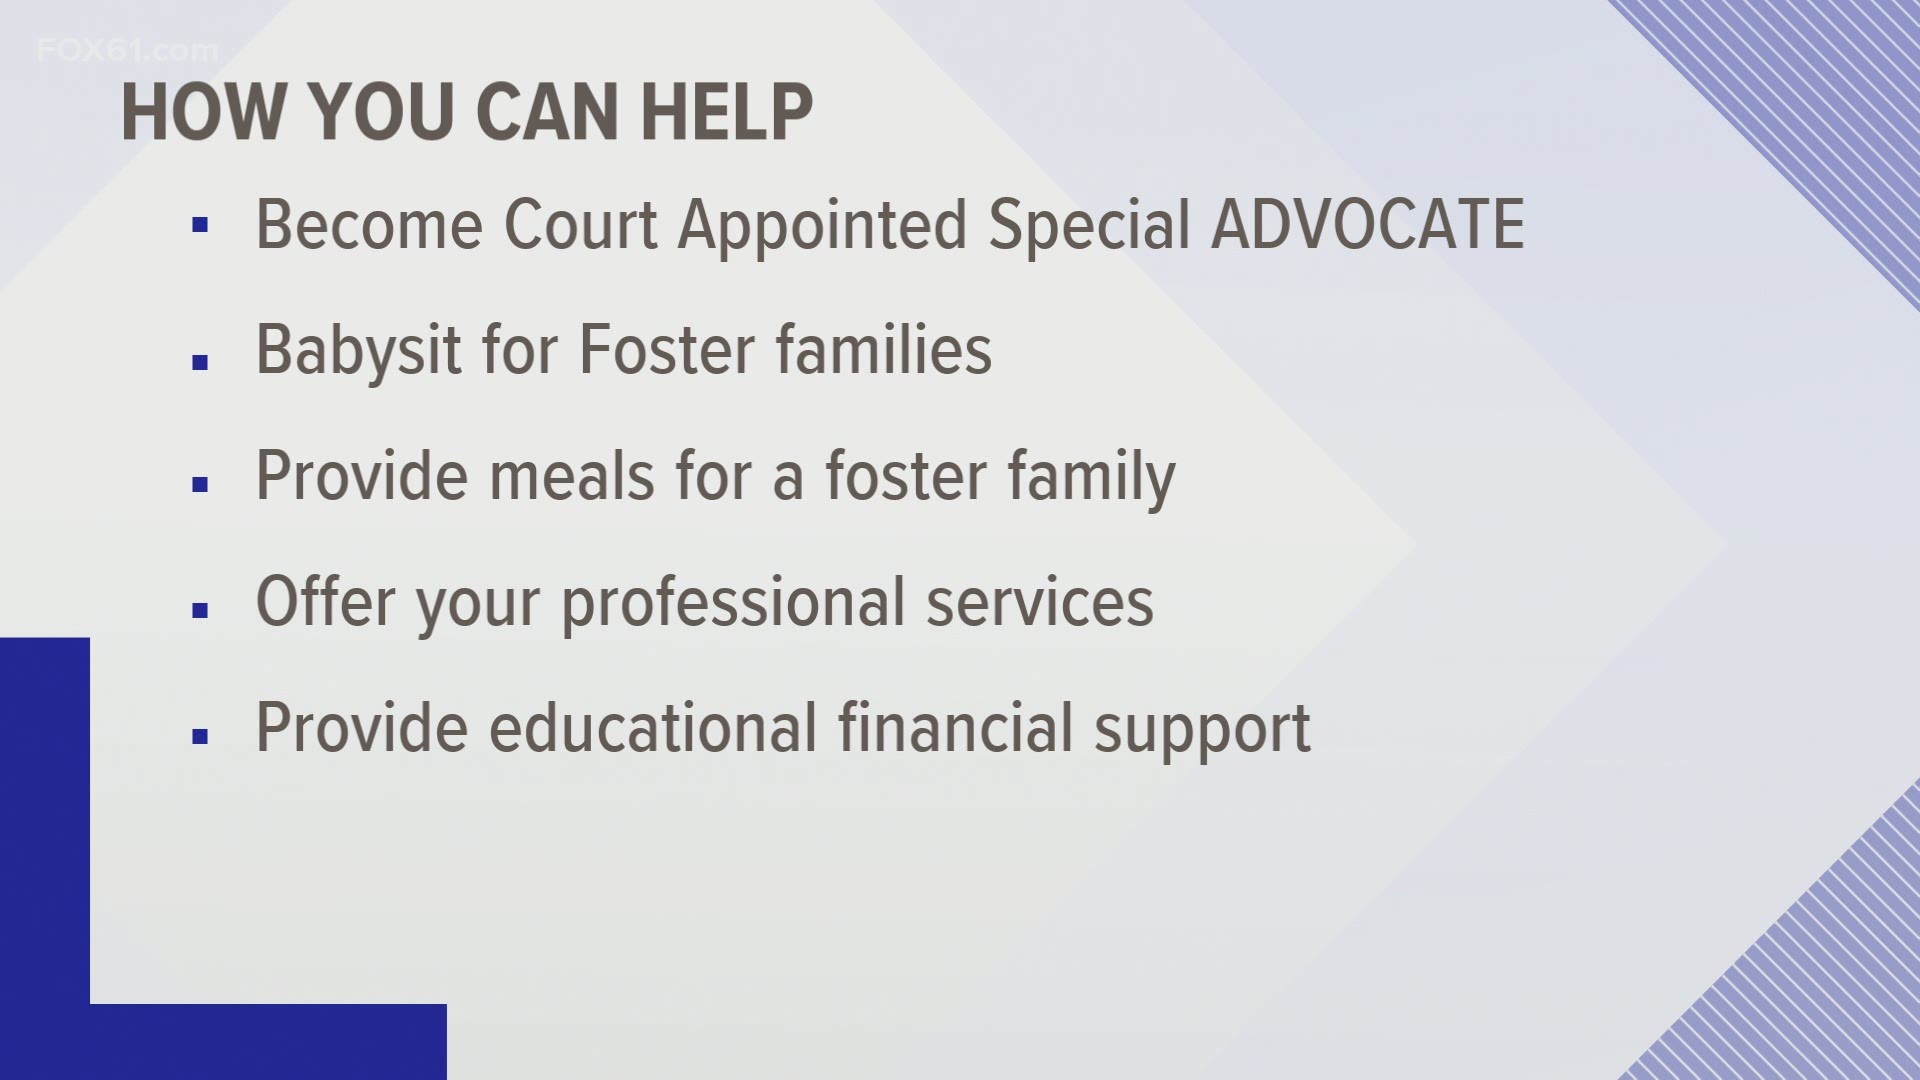 May is National Foster Care Month and here are ways you can help.